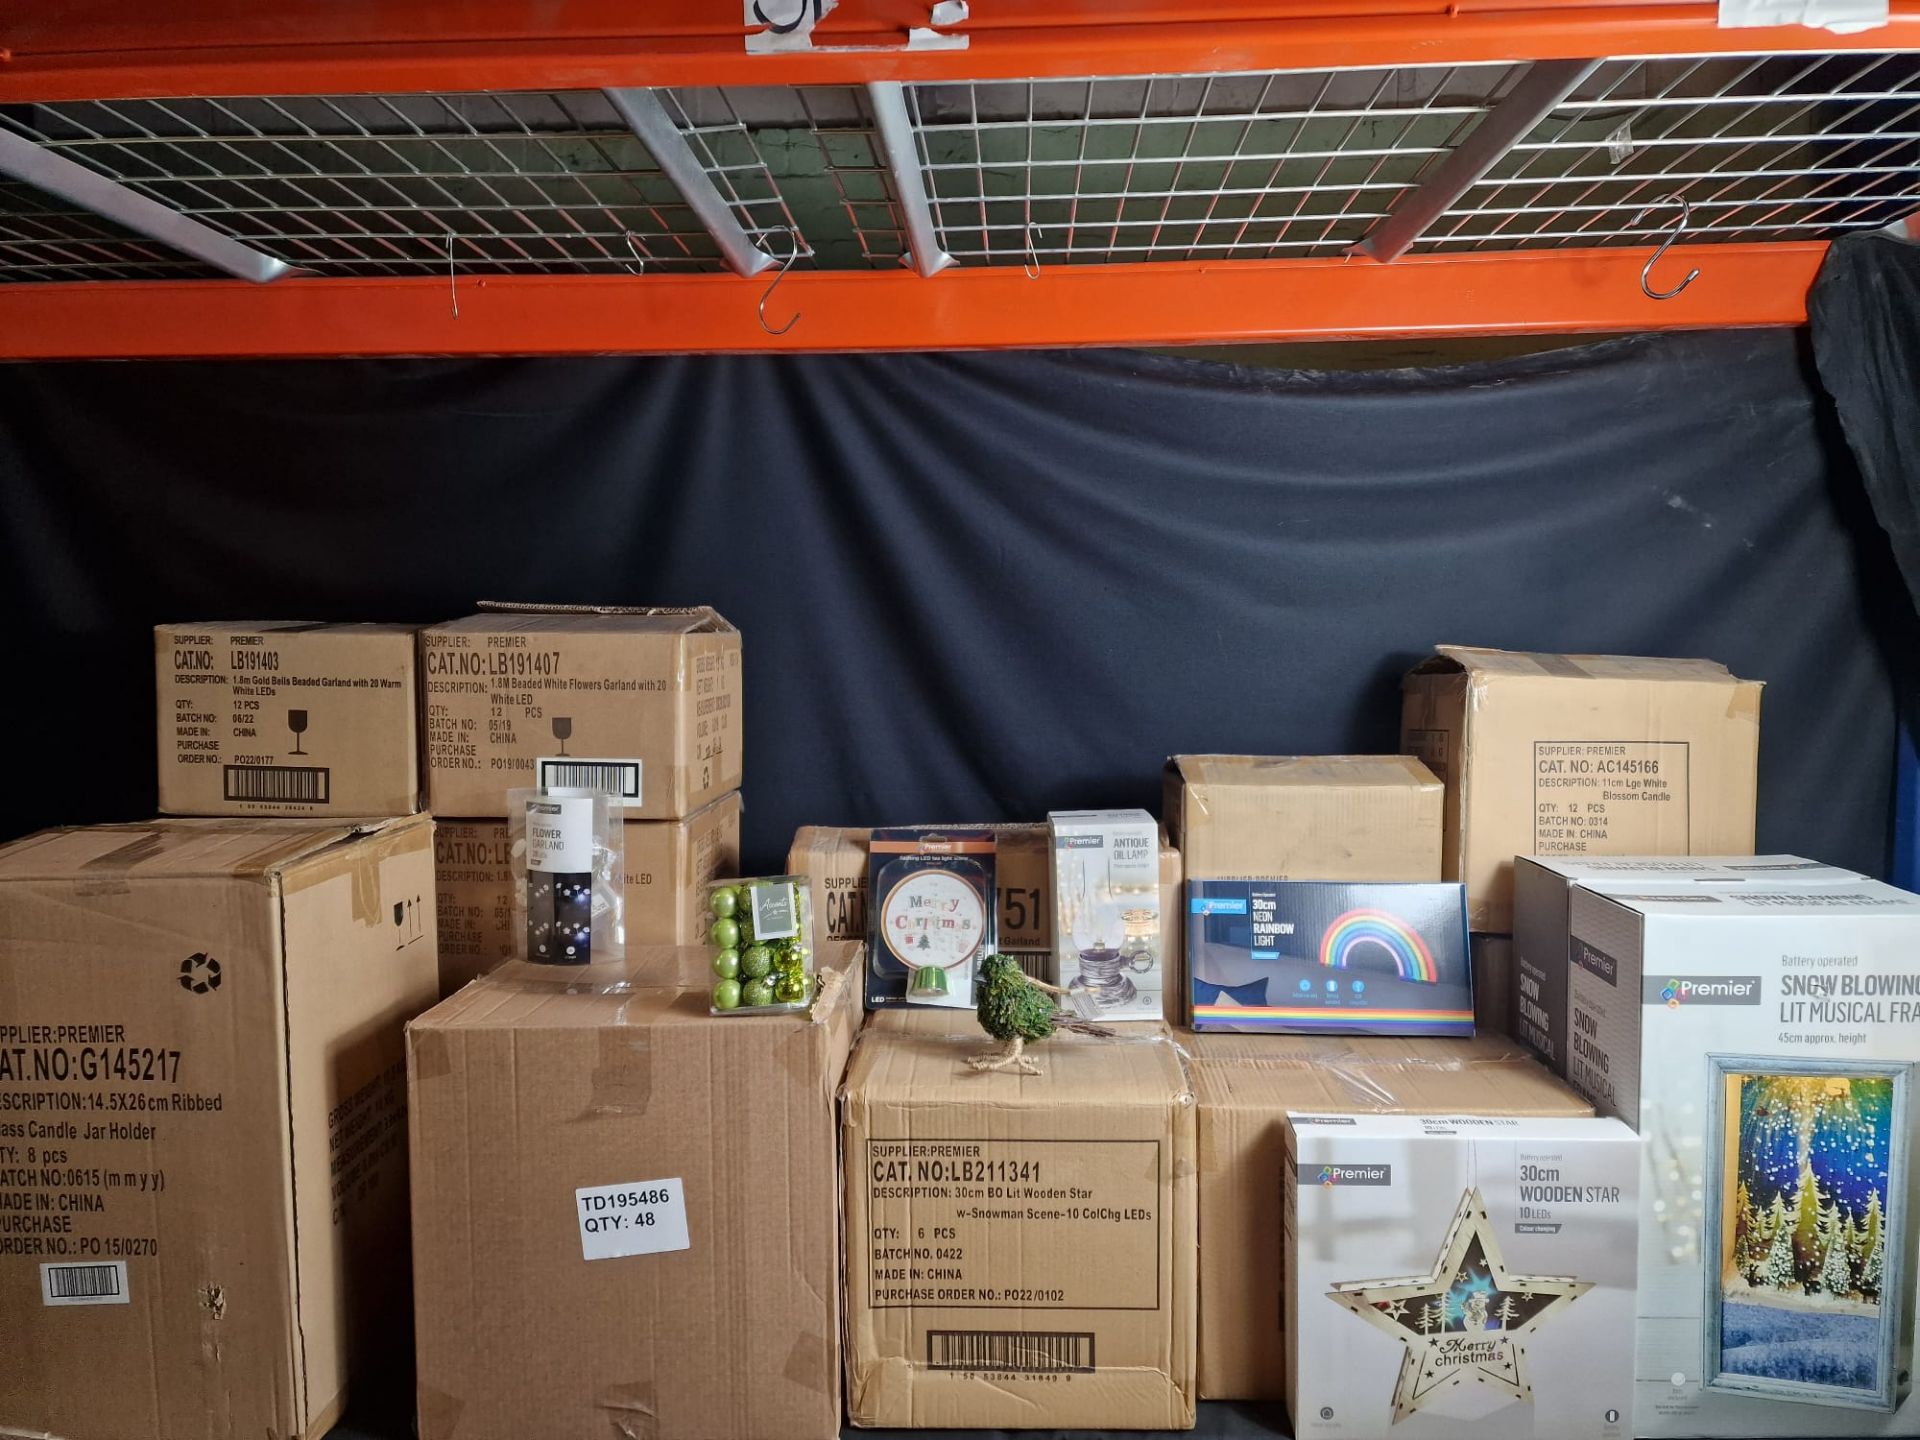 1 PALLET OF PREMIER BRANDED CLEARANCE DECORATIONS LIGHTS,DECORATIONS, CANDLES & MORE! - Image 2 of 3